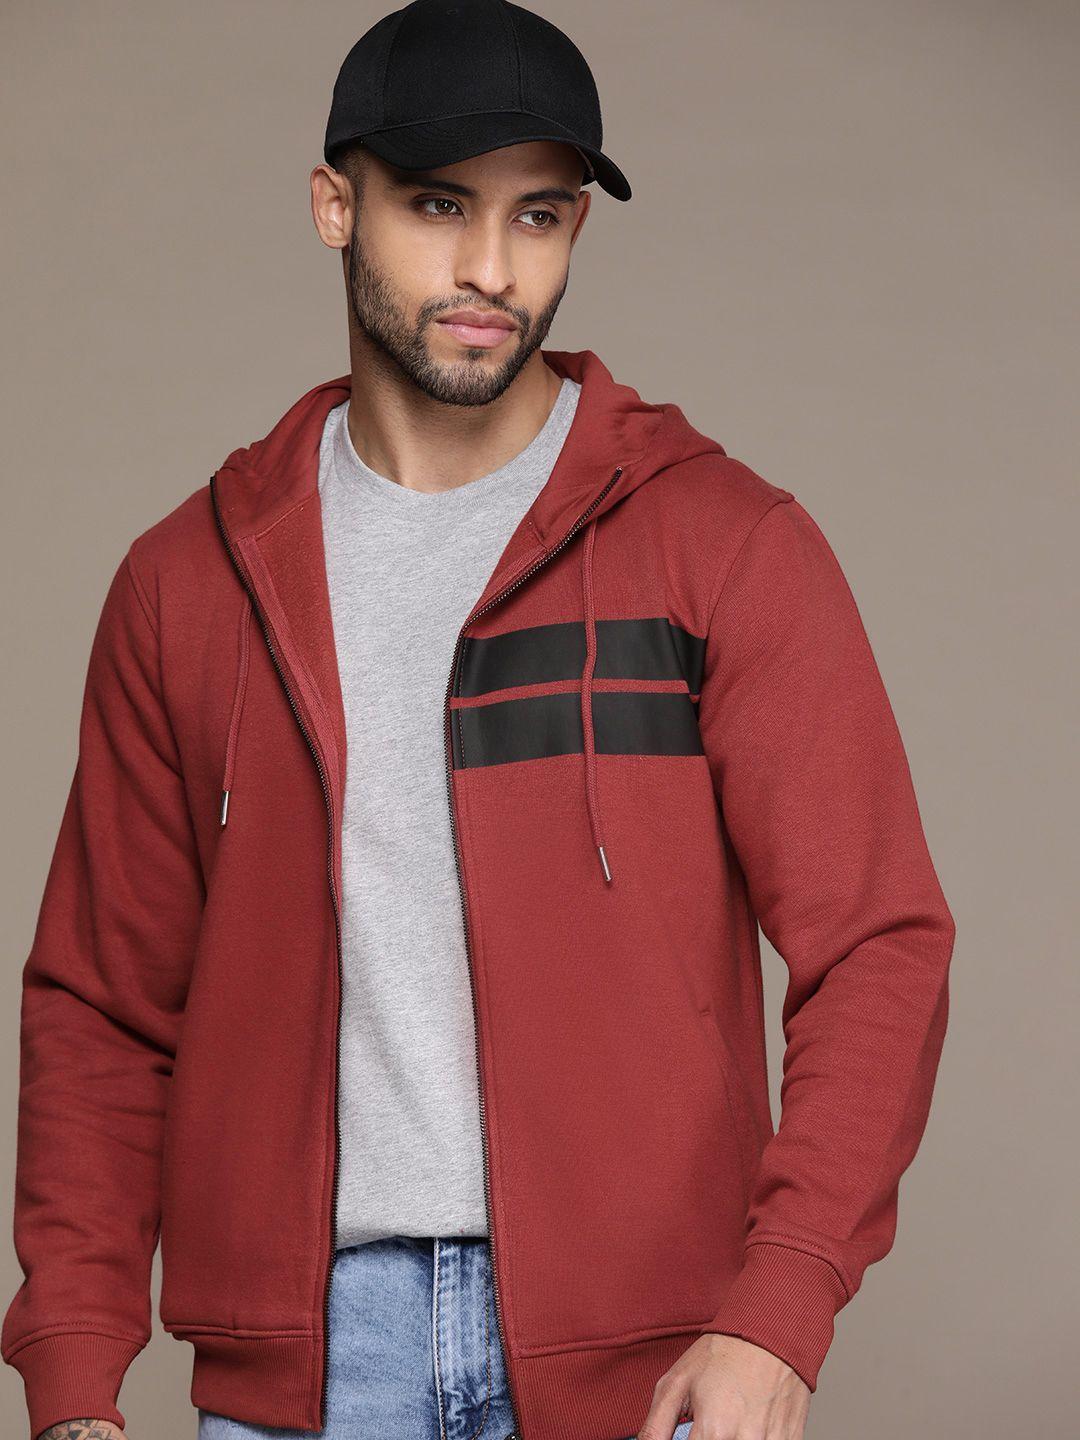 the roadster lifestyle co. striped hooded sweatshirt